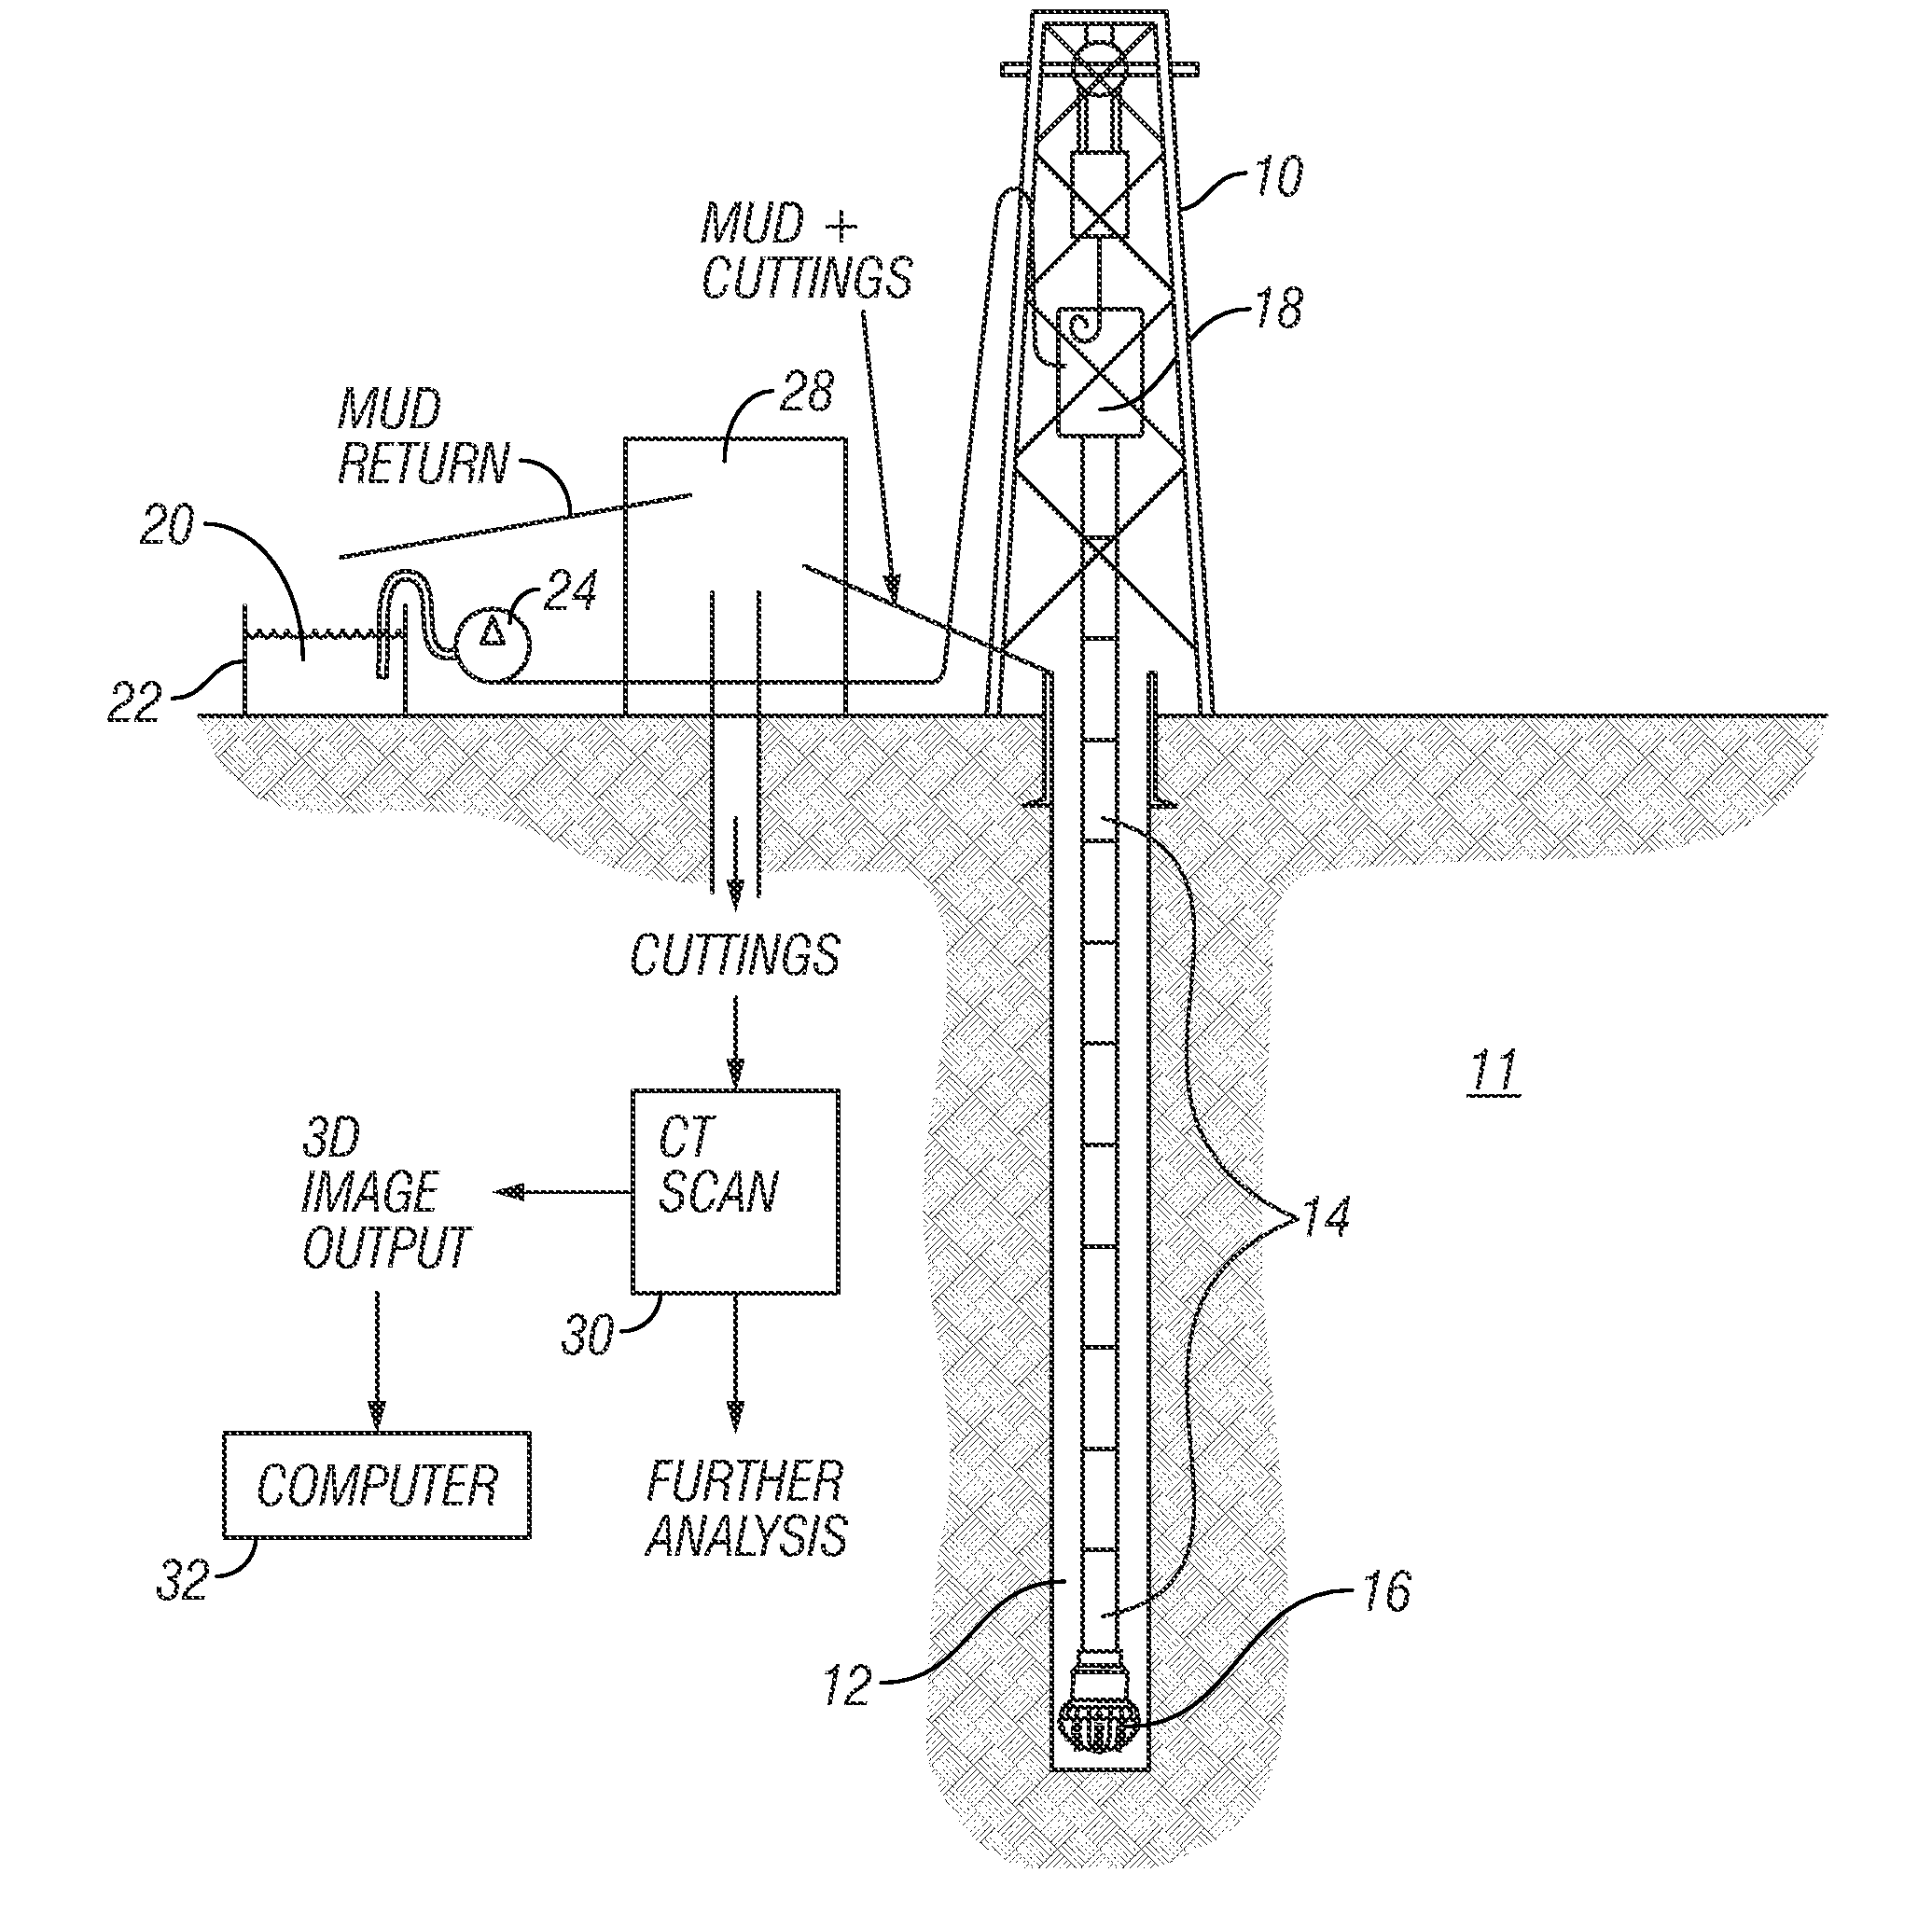 Method for determining properties of fractured rock formations using computer tomograpic images thereof